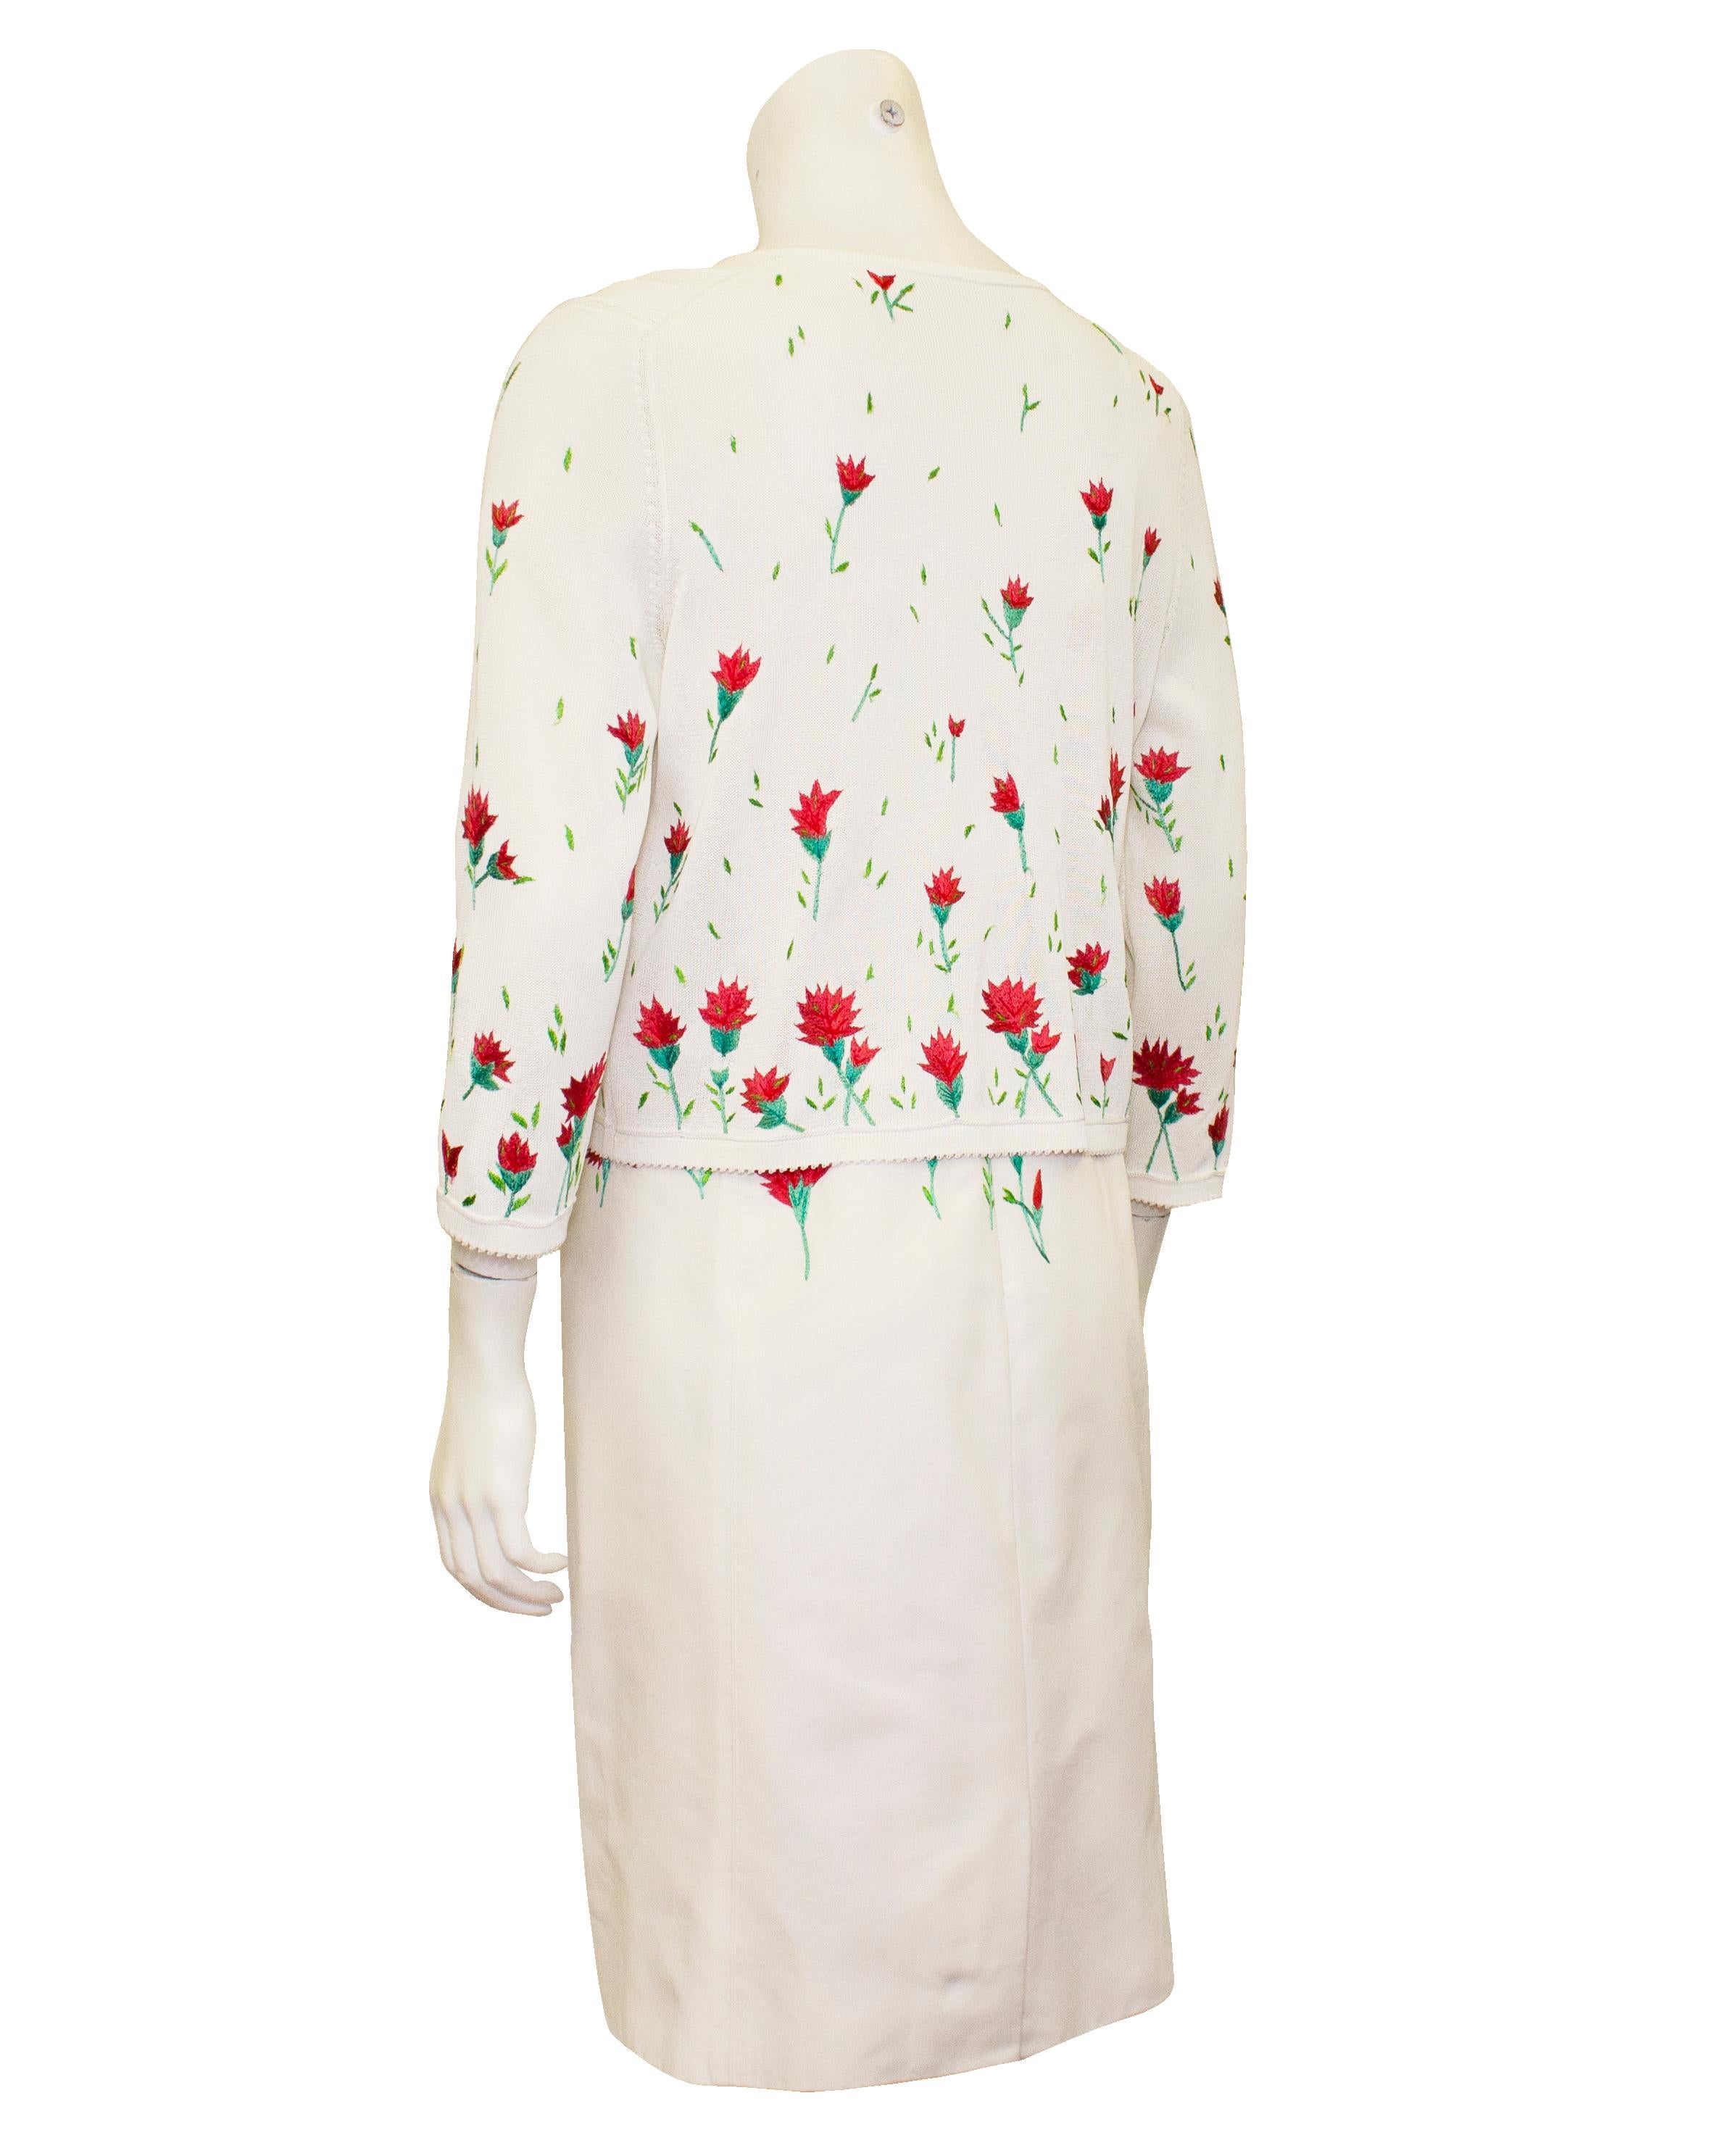 Early 2000s Oscar de la Renta Carnation Embroidered Dress and Cardigan Ensemble  In Good Condition For Sale In Toronto, Ontario